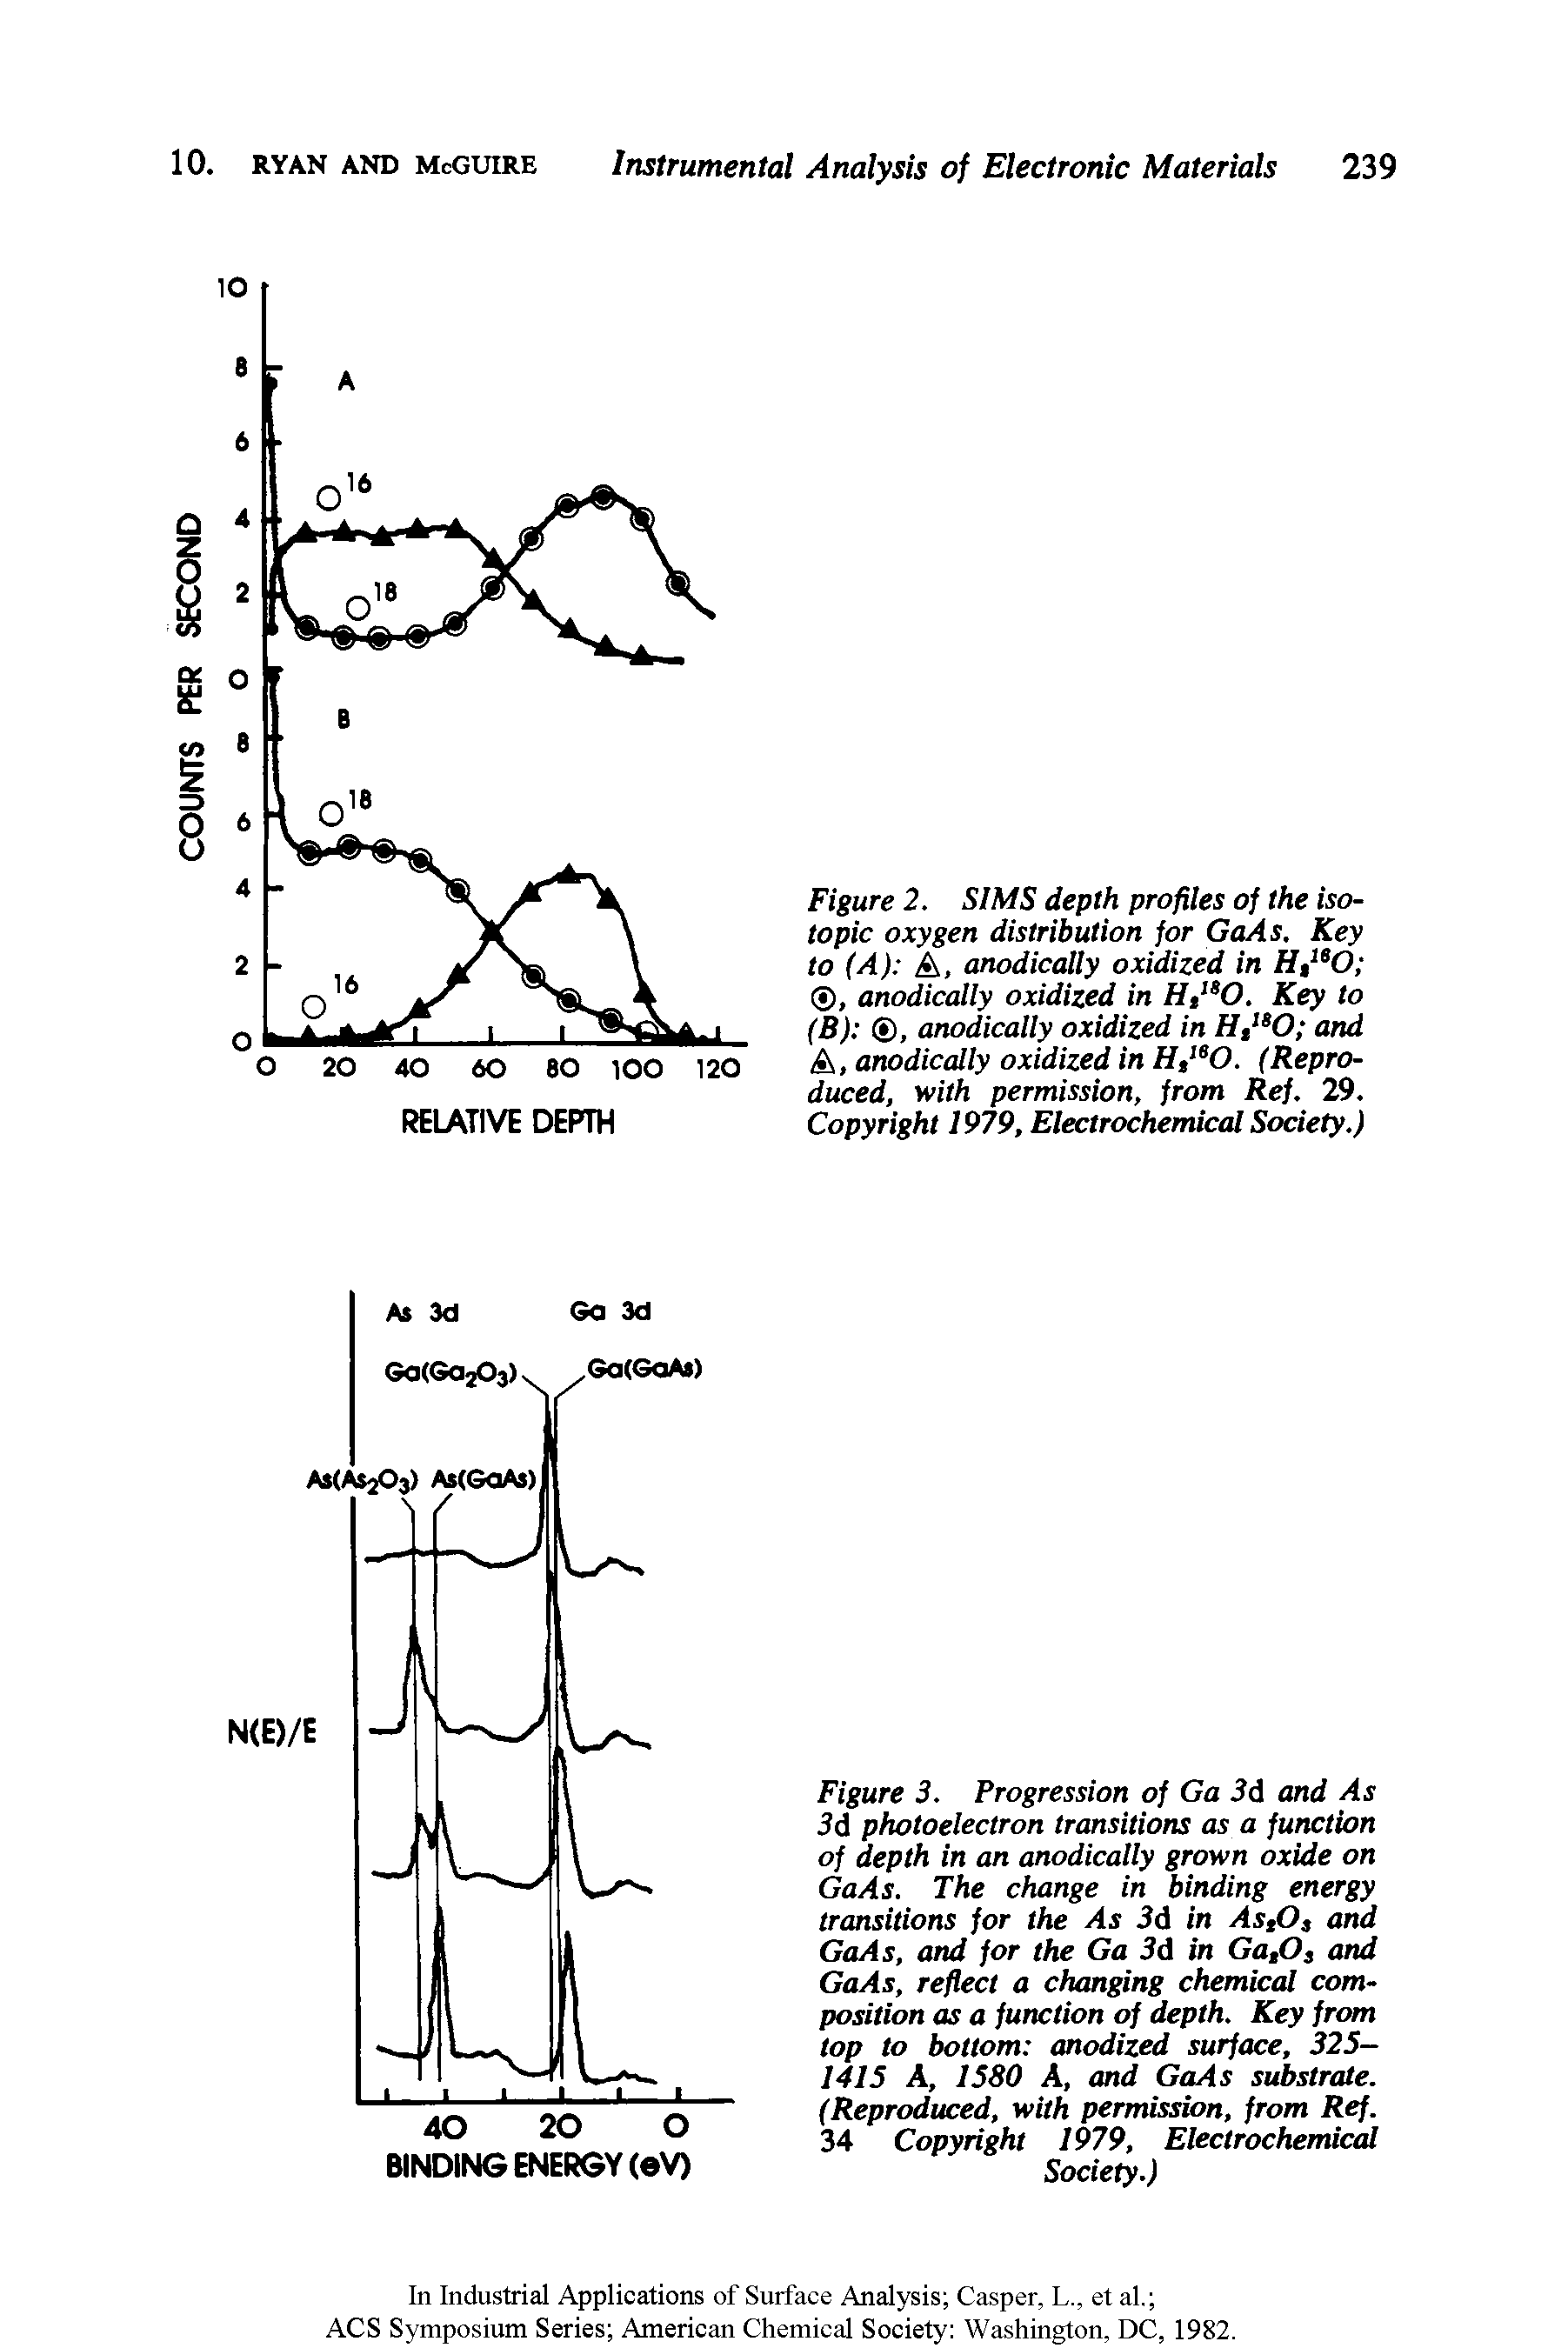 Figure 2. SIMS depth profiles of the isotopic oxygen distribution for GaAs. Key to (A) A, anodically oxidized in H,leO , anodically oxidized in H,IS0. Key to (B) , anodically oxidized in H,lsO and A, anodically oxidized in H,laO. (Reproduced, with permission, from Ref. 29. Copyright 1979, Electrochemical Society.)...